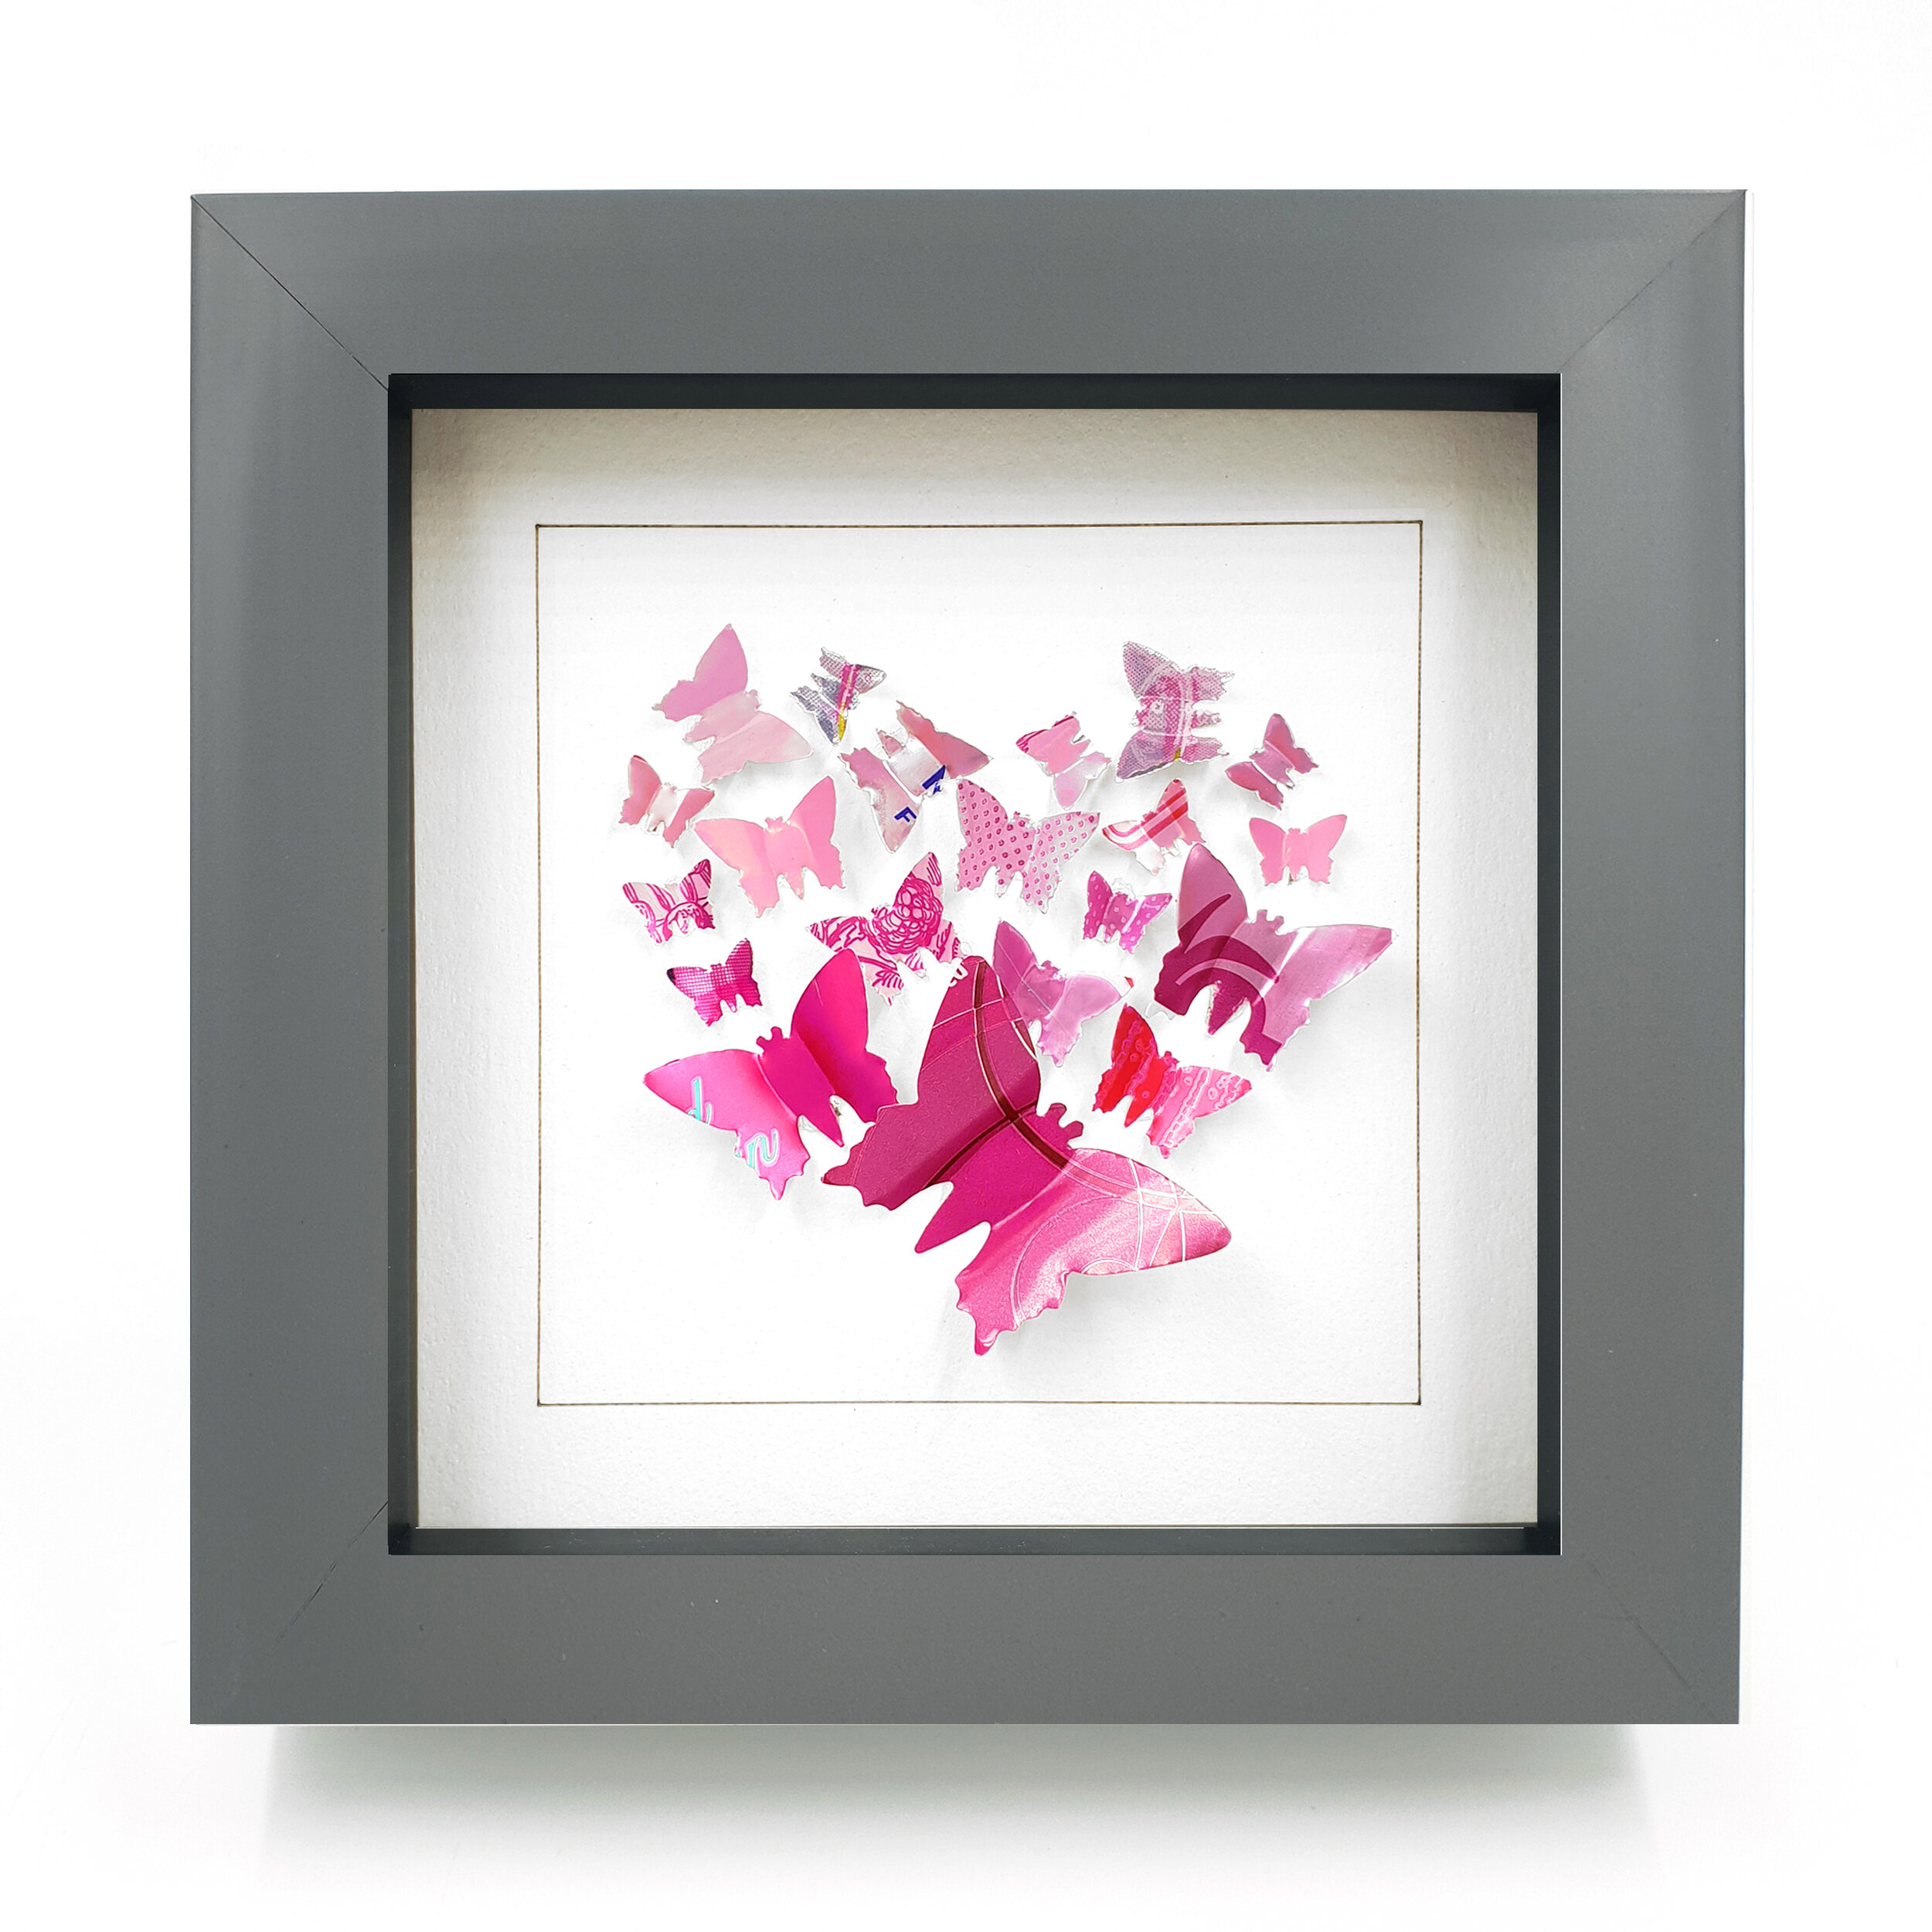 Recycled pink heart butterfly design white frame wall art grey frame